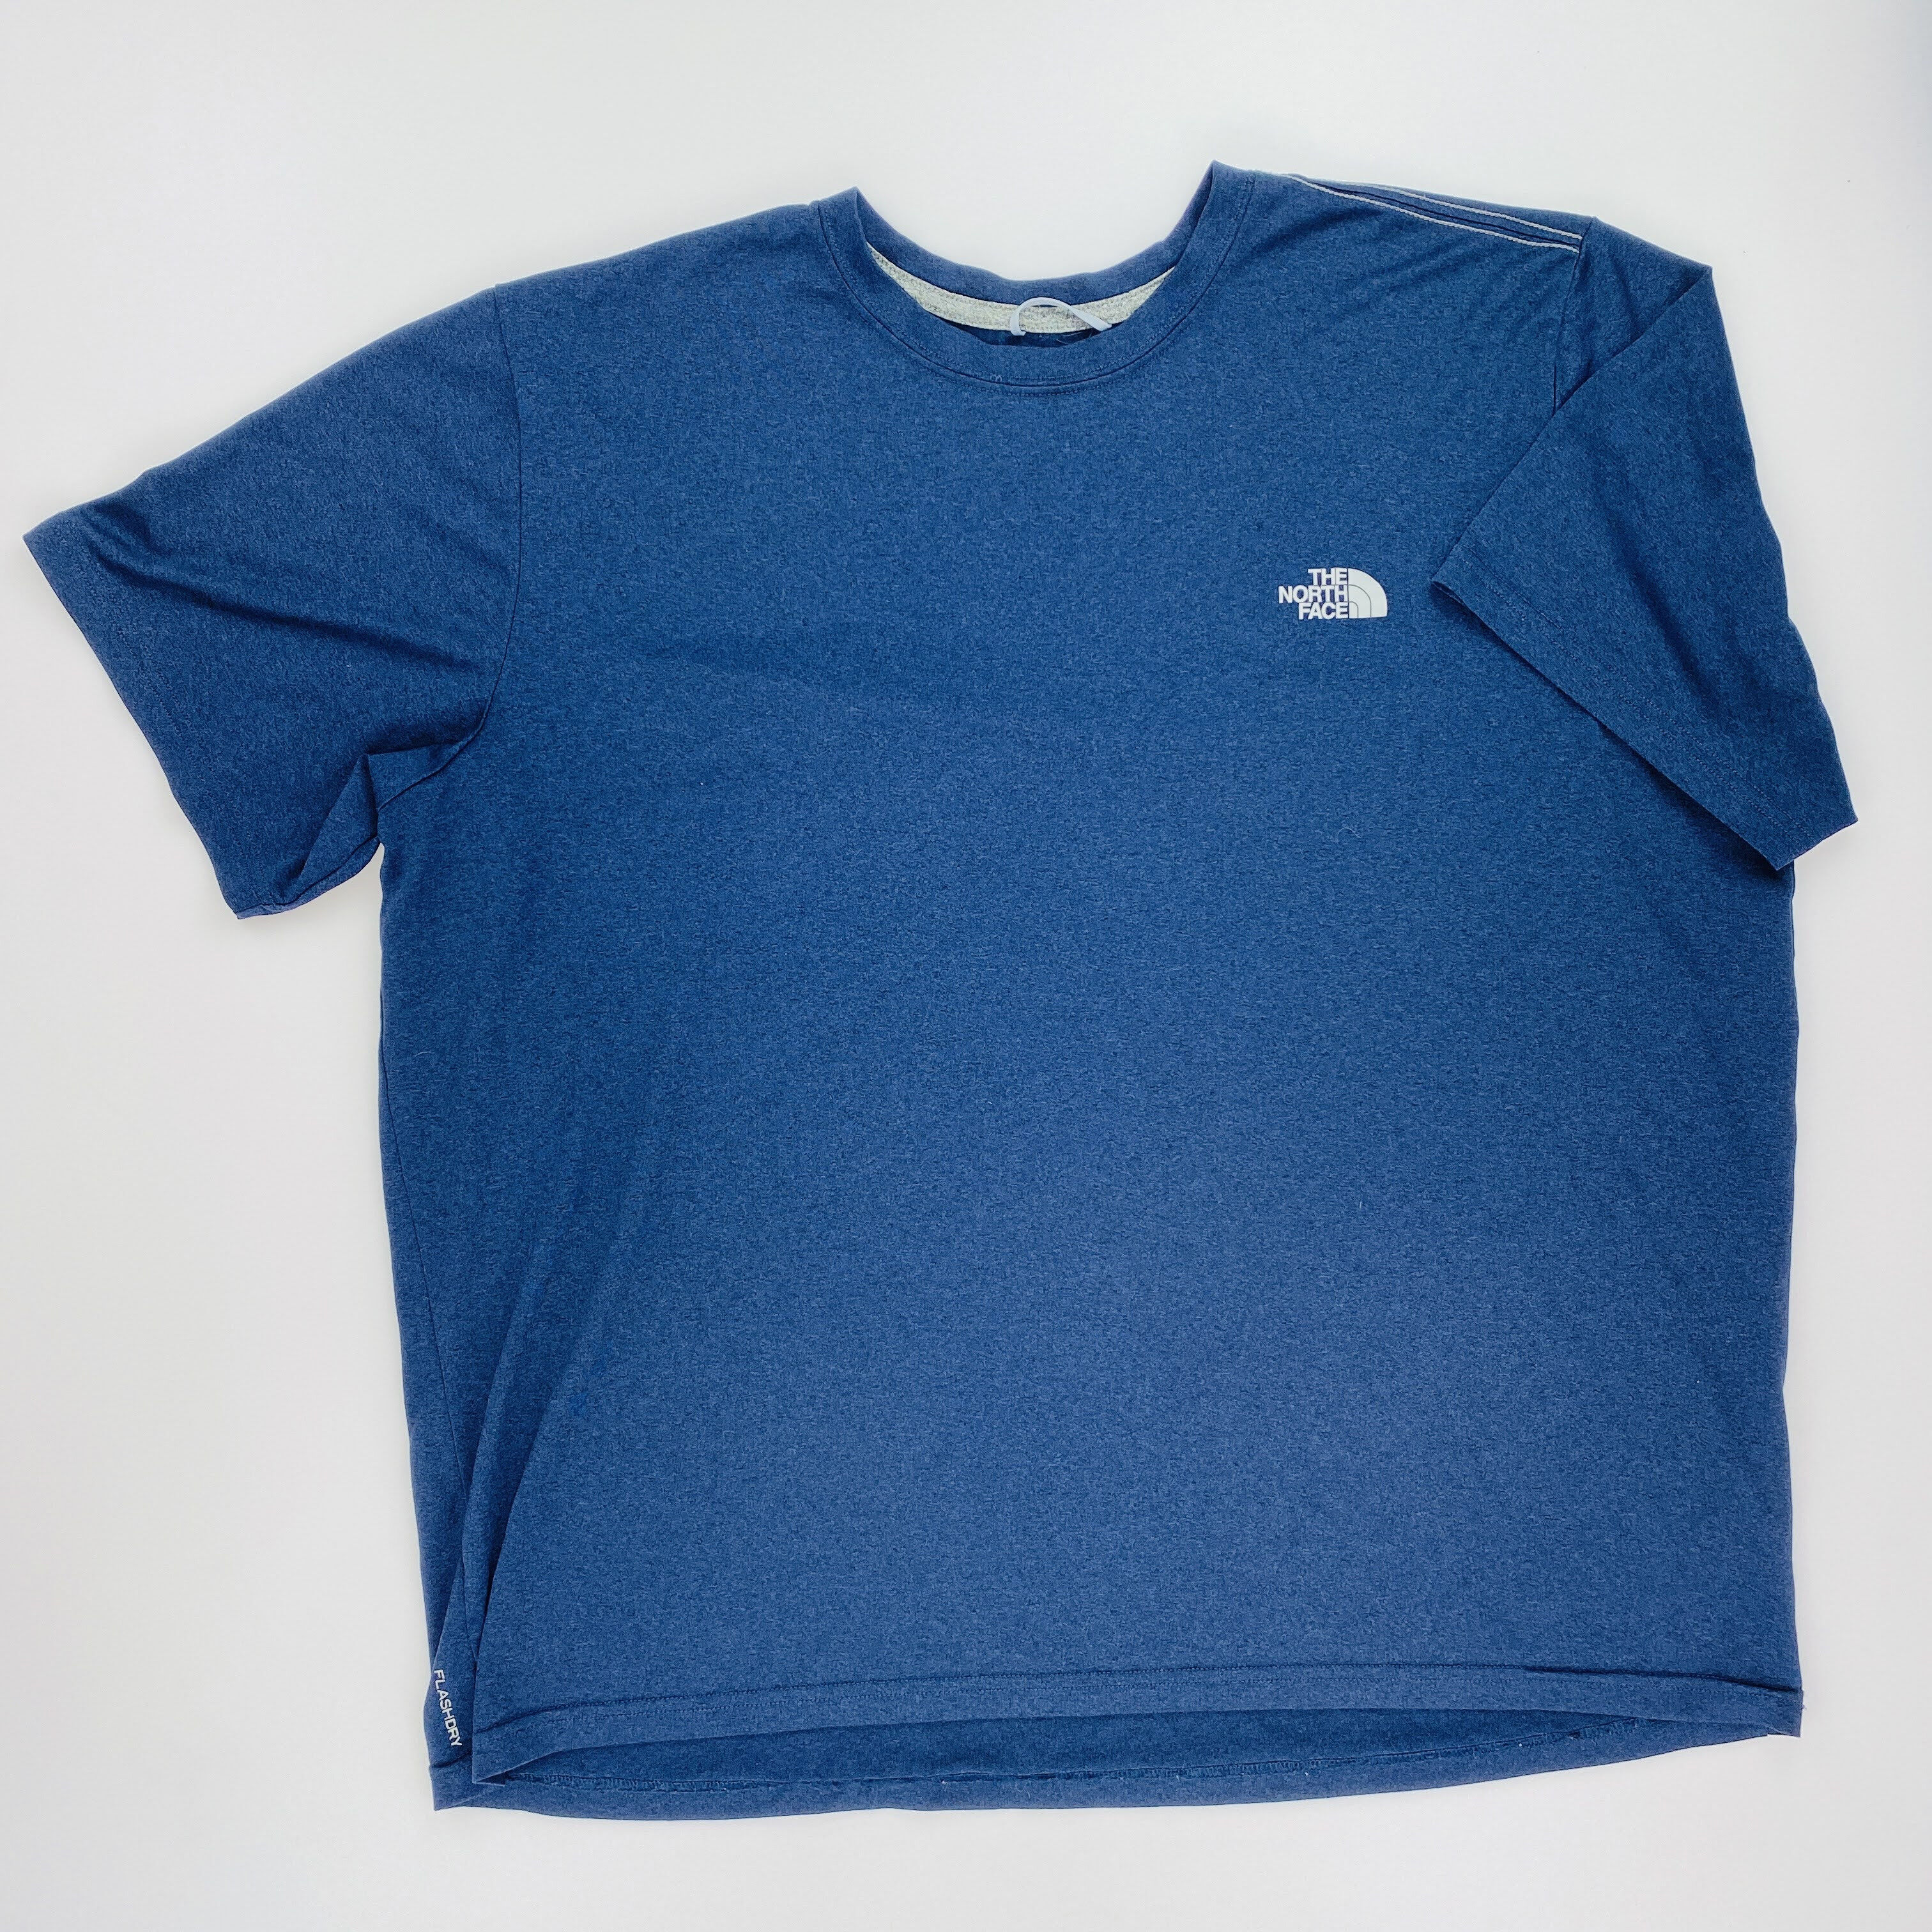 The North Face Simple Dome Tee - Seconde main T-shirt femme - Bleu - XL | Hardloop